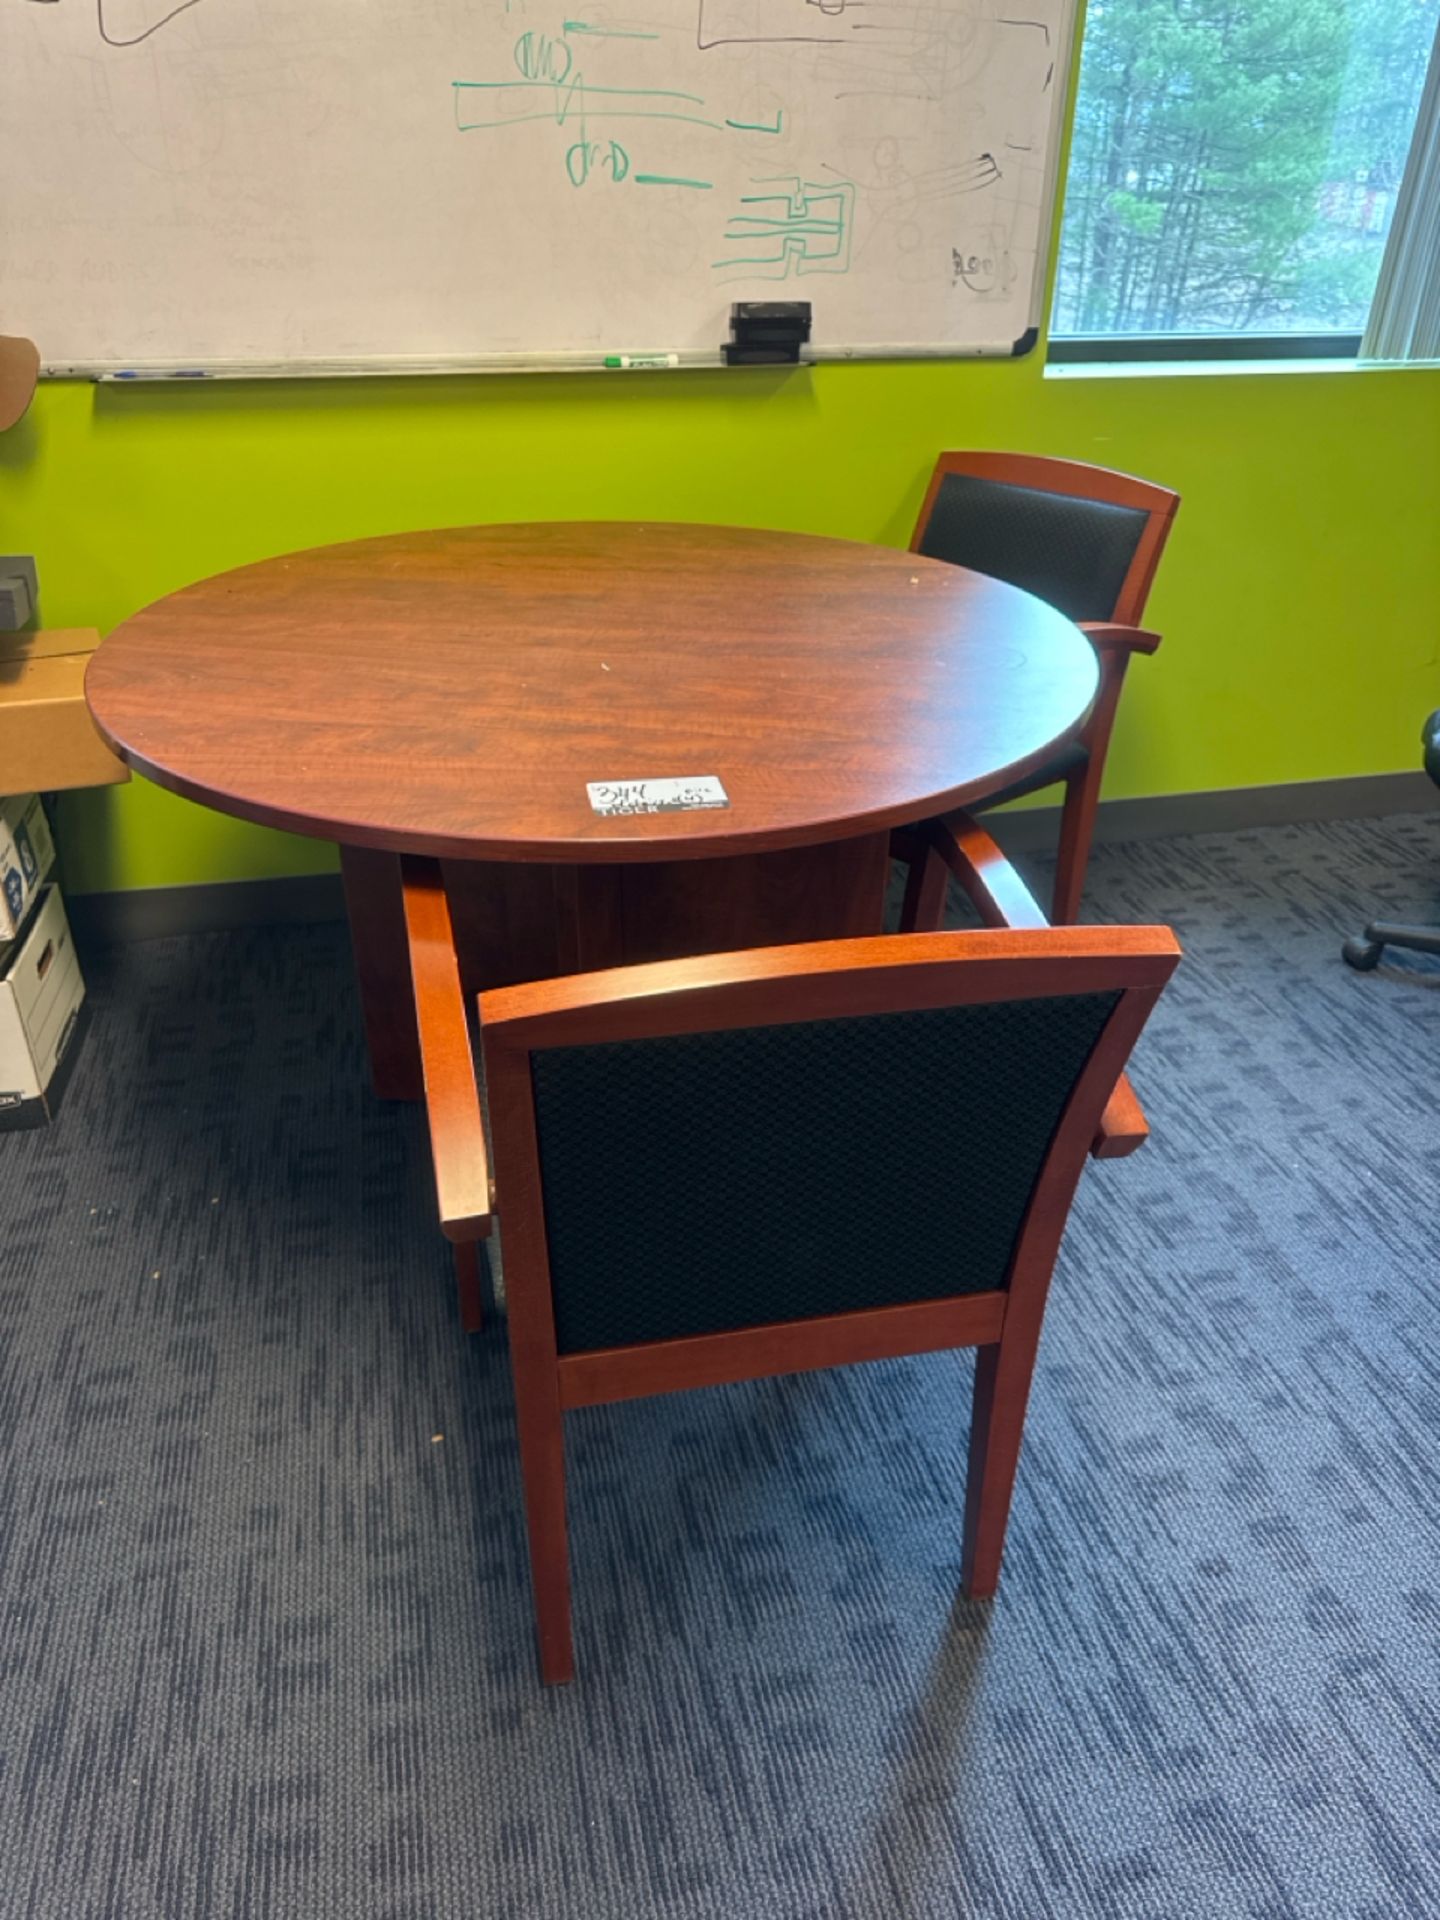 Offices to Go Table w/ Chairs & File Cabinets